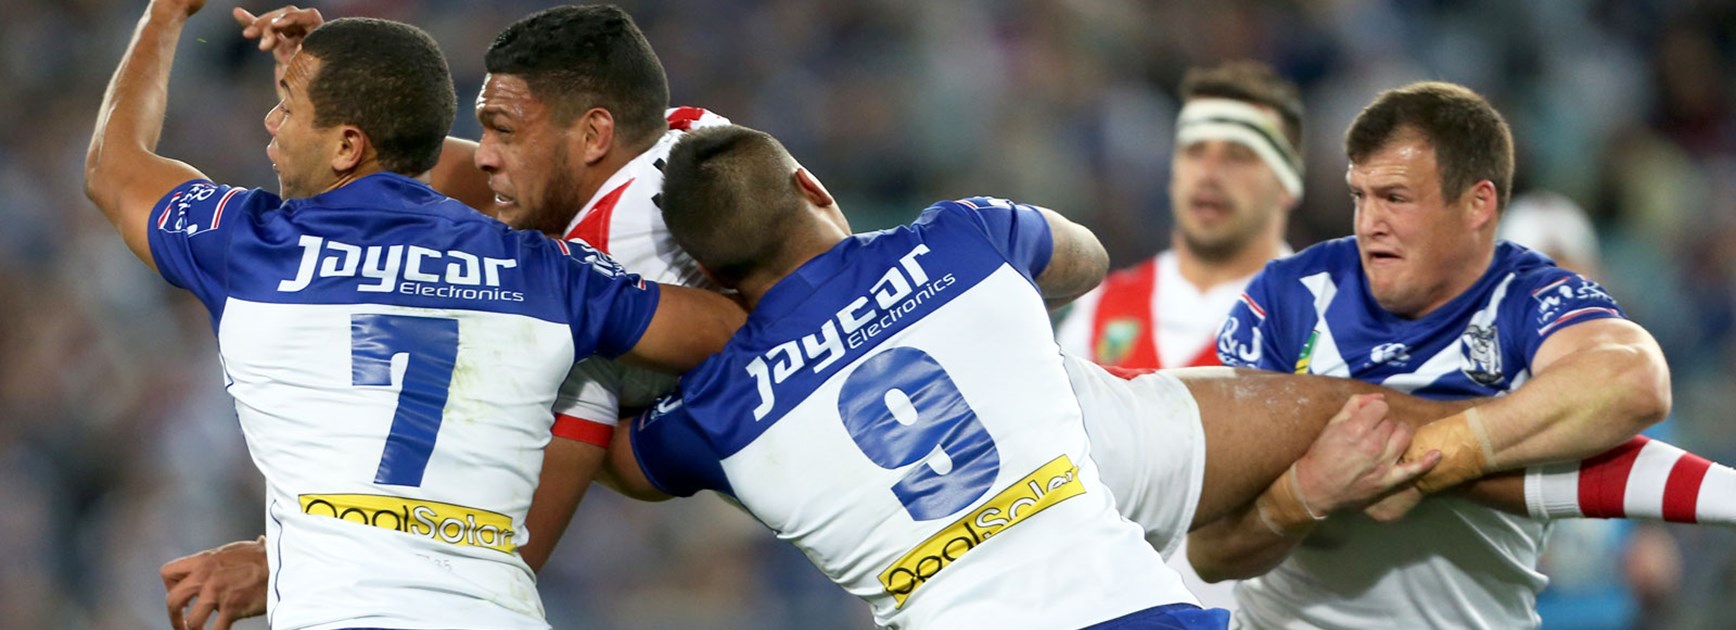 The Bulldogs showed plenty of determination in defence against the Dragons.